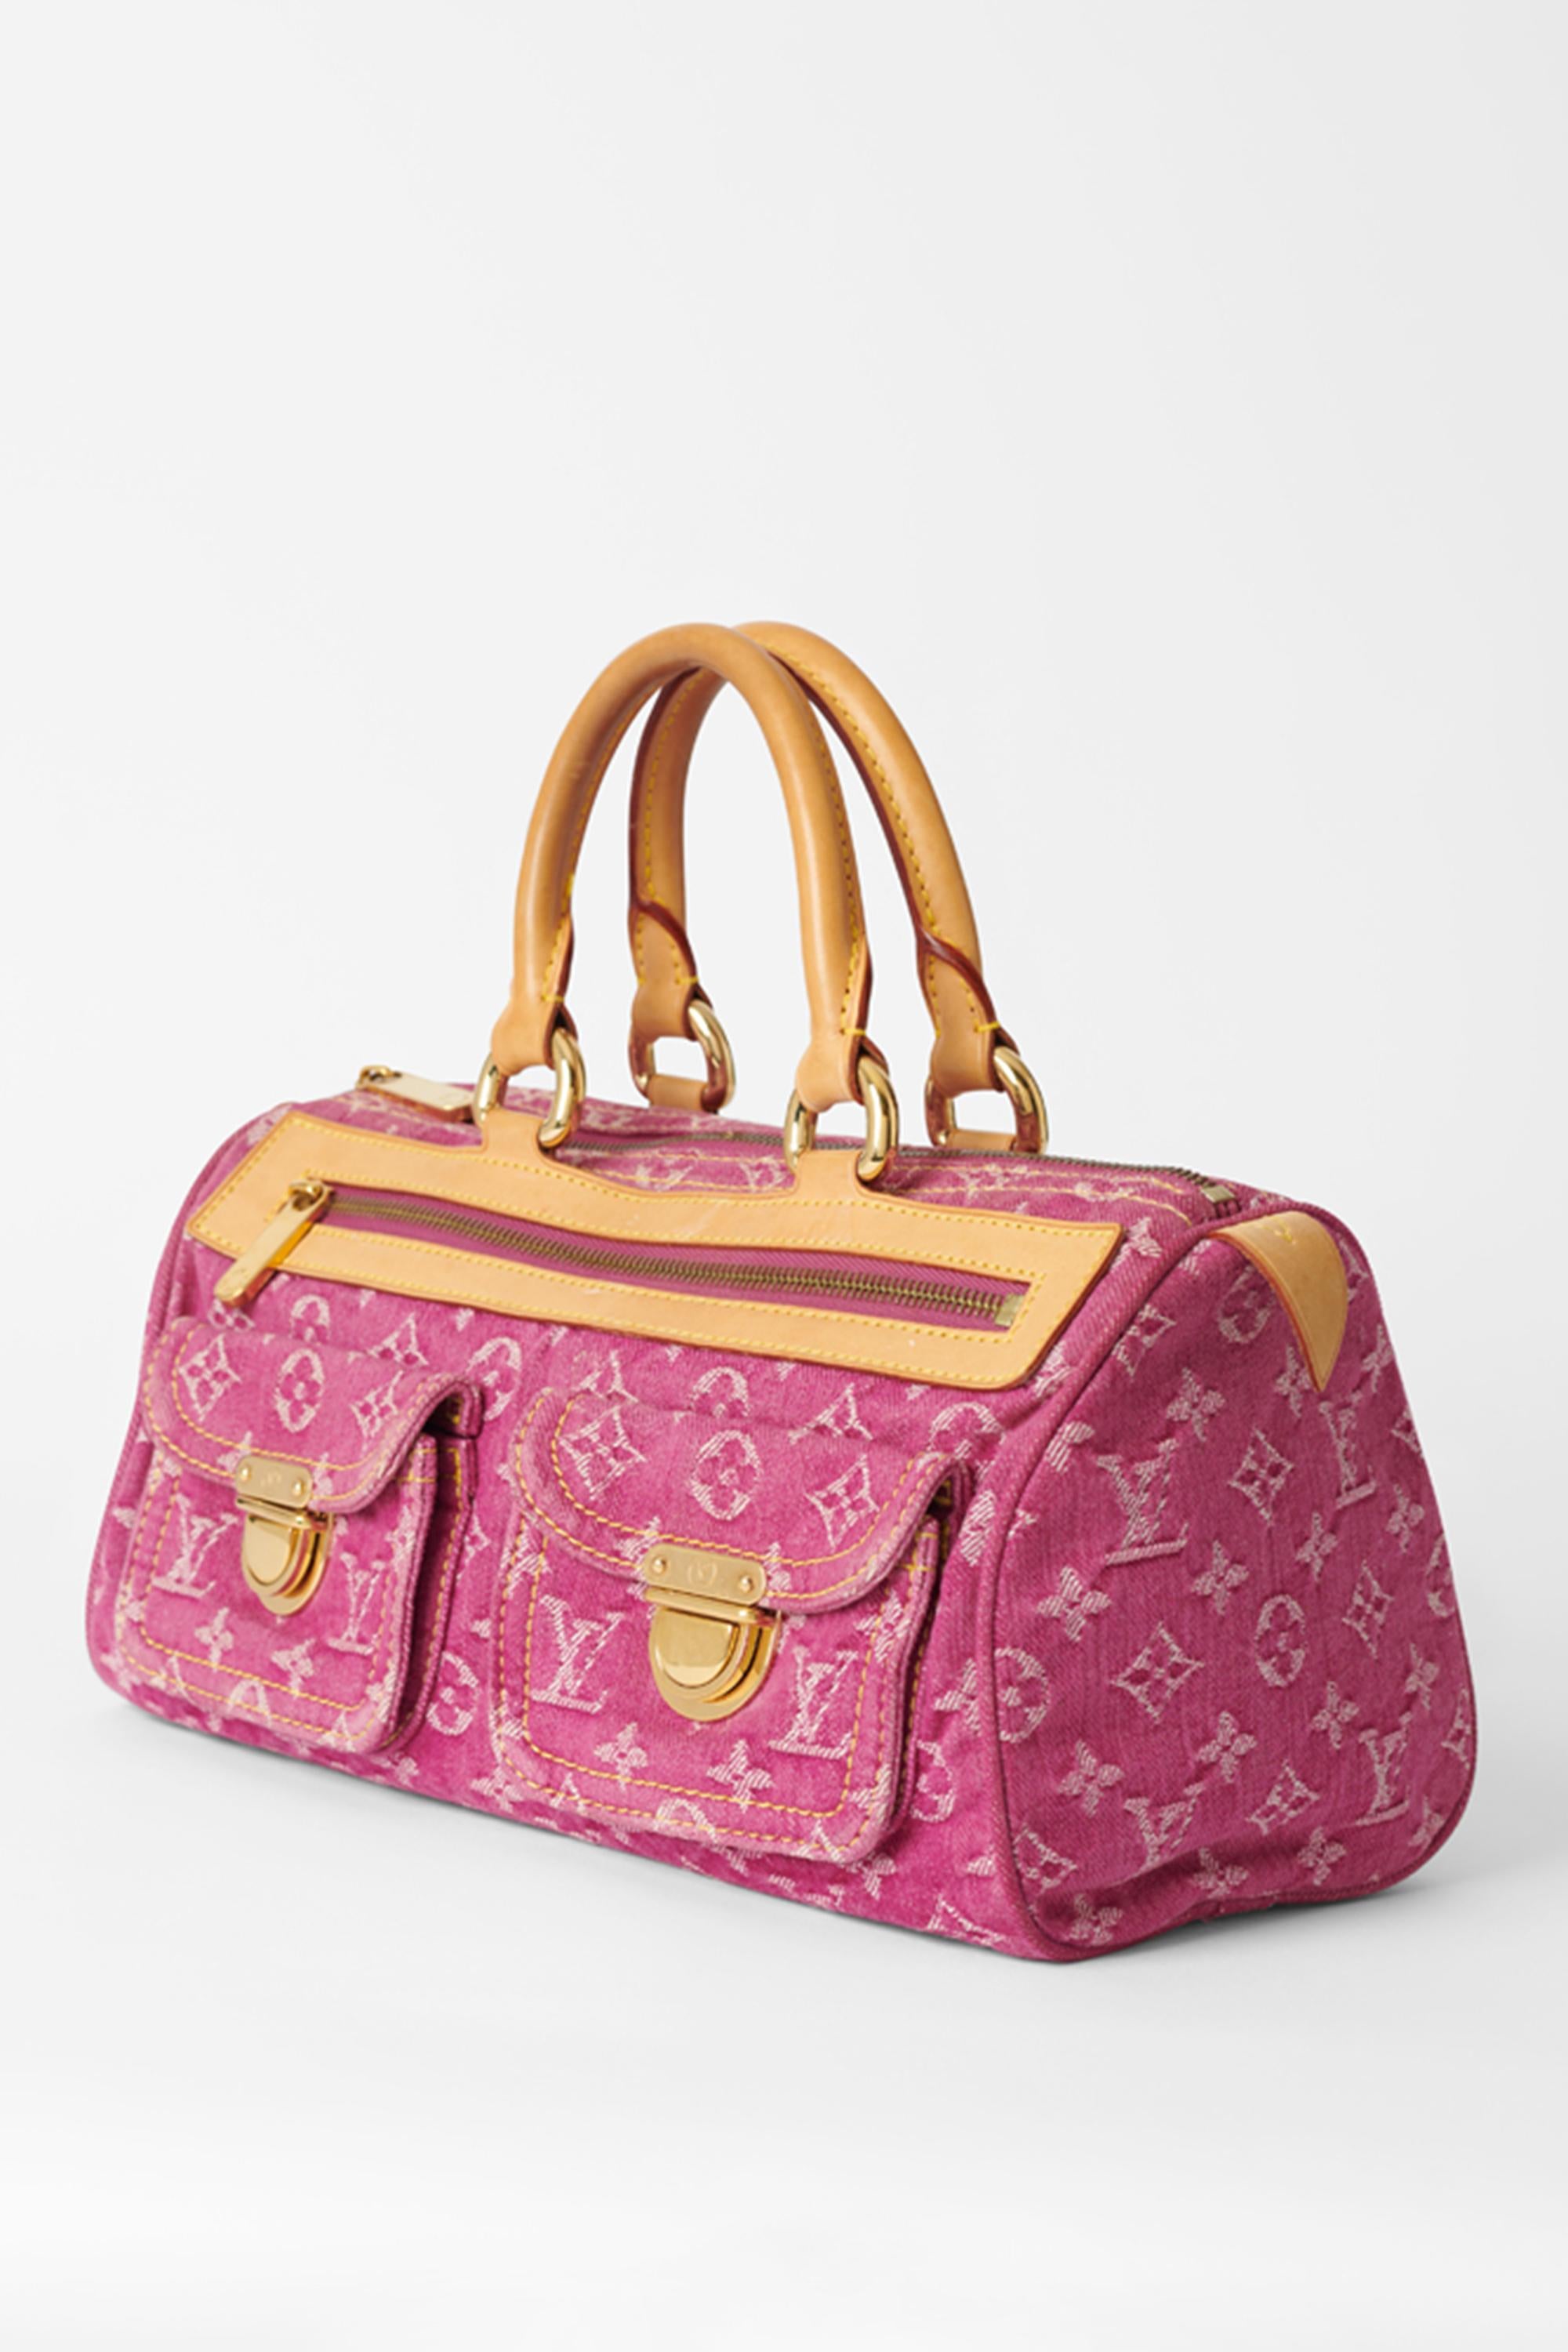 Louis Vuitton 2006 pink denim speedy bag with matching scarf. Features allover monogram, double front pockets with LV hardware, zip front pocket and main compartment with zip closure. Top handle bag with gold hardware attachments. In excellent